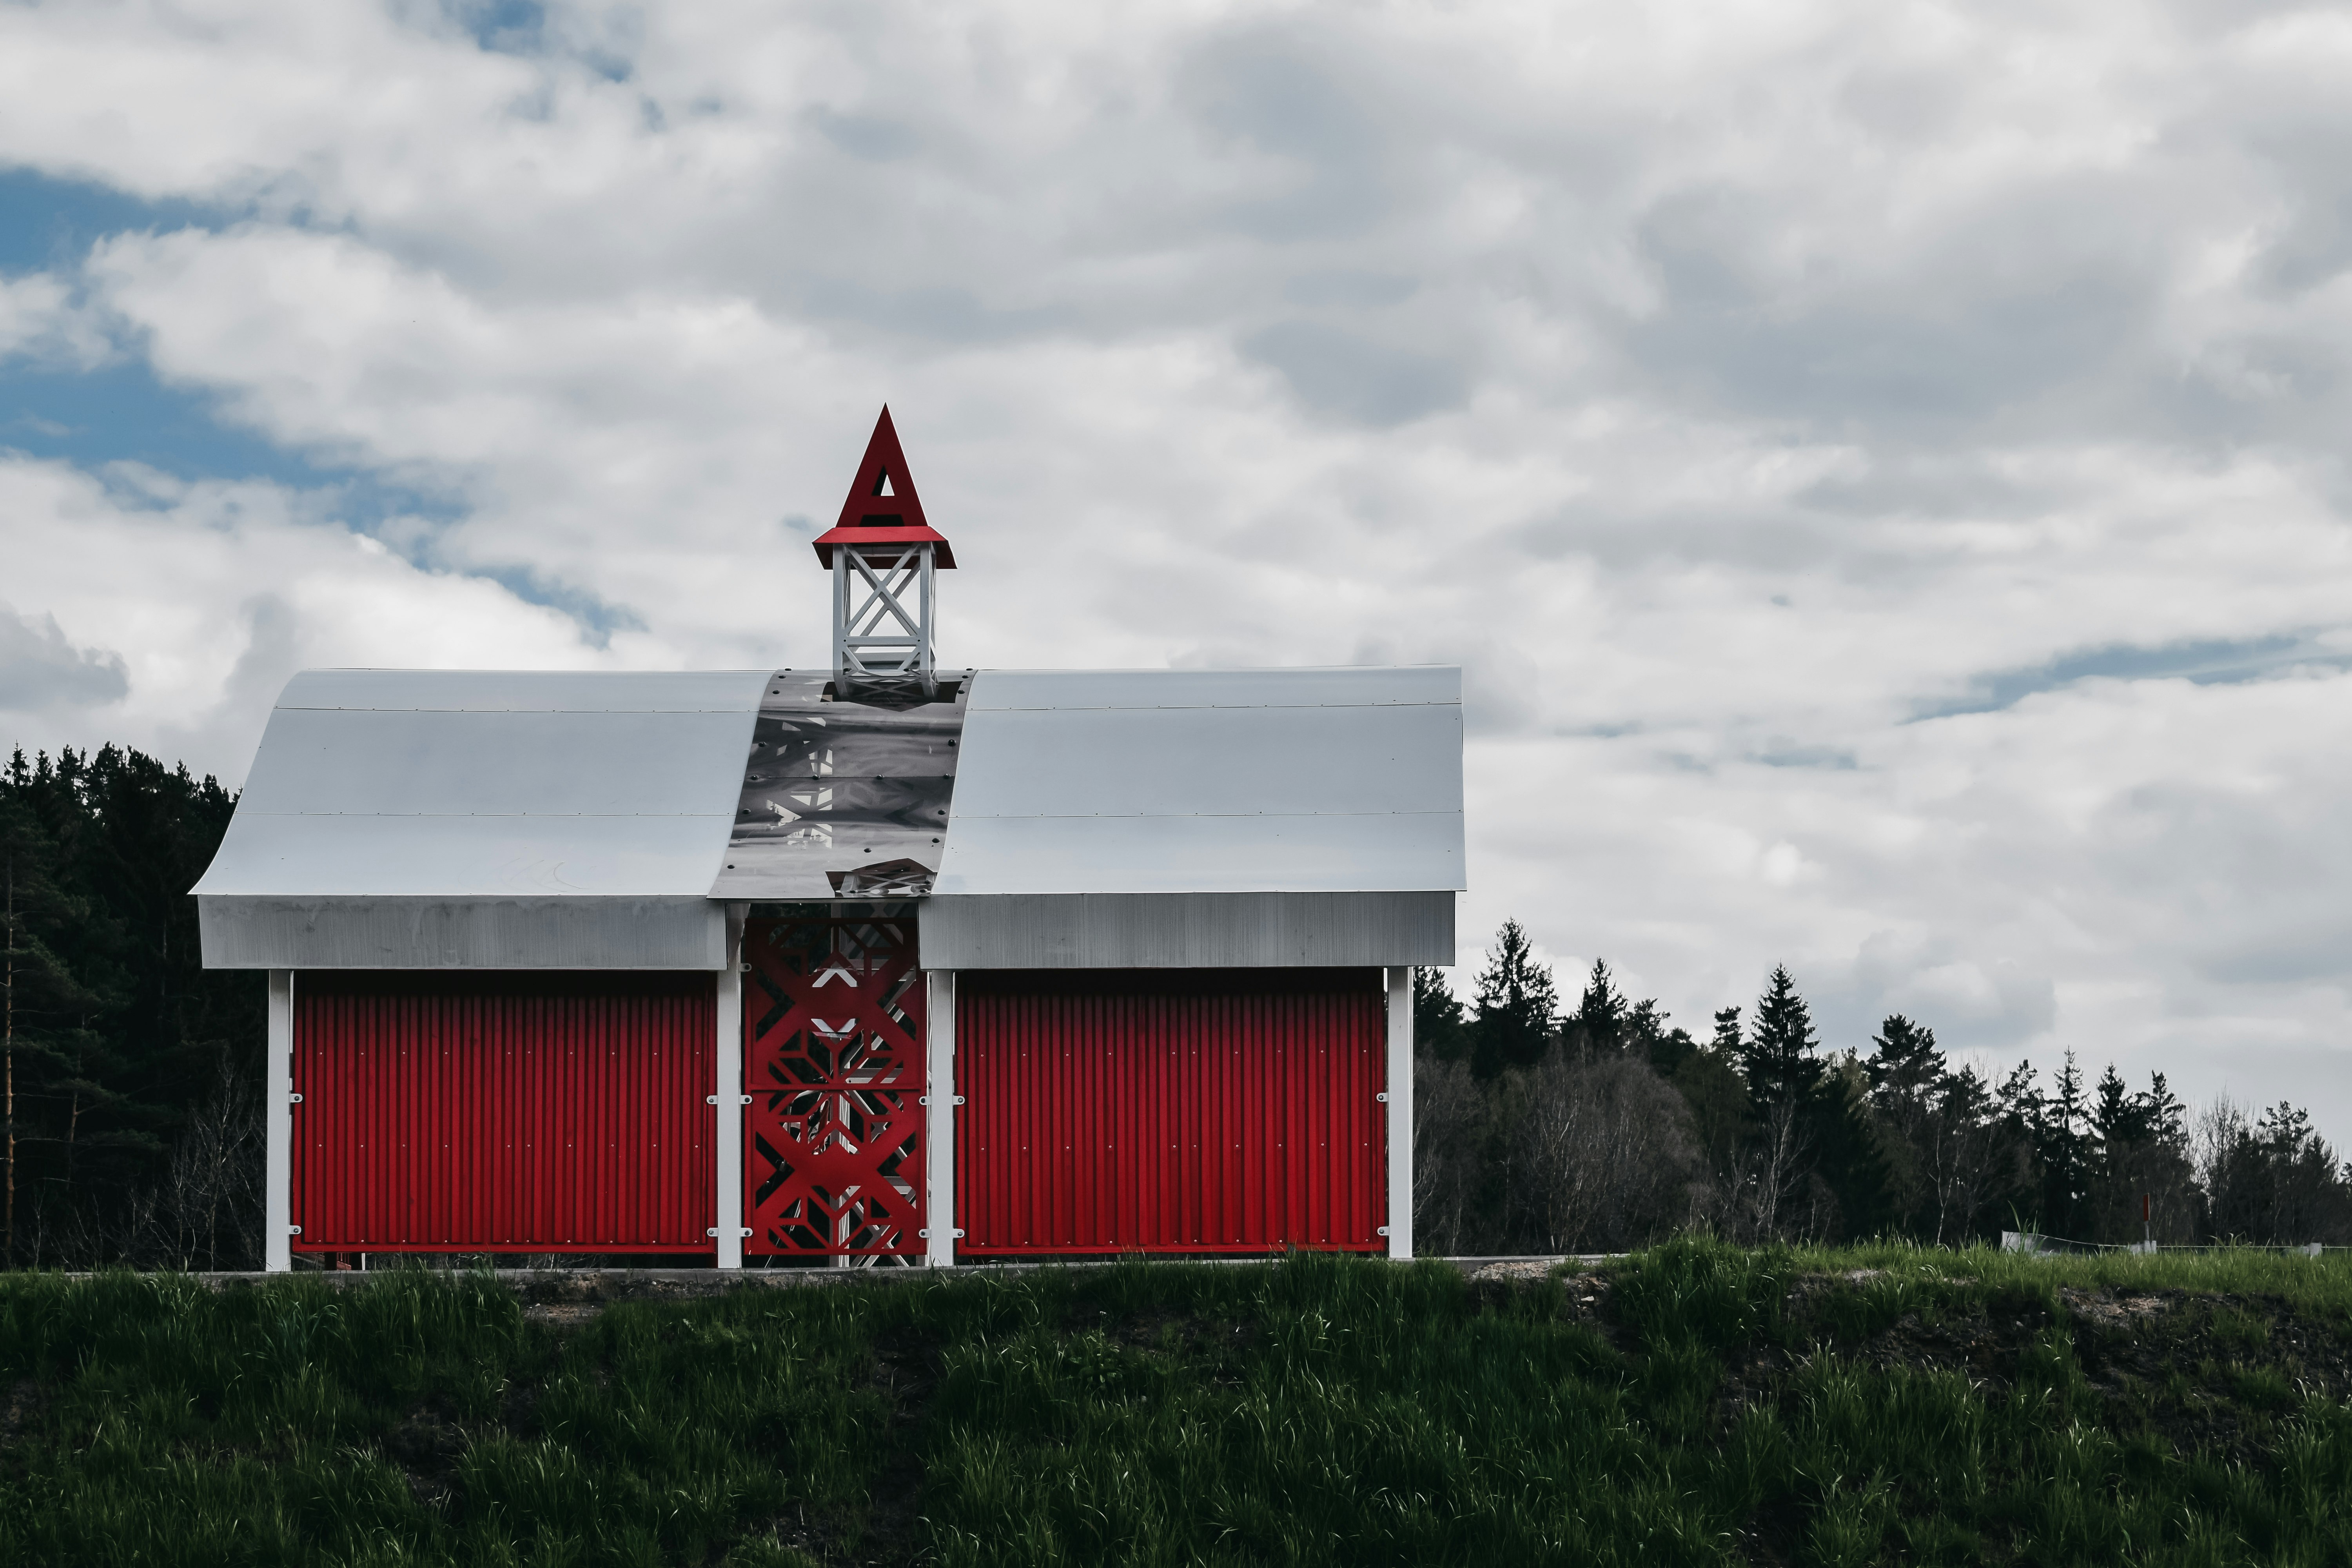 red and white barn house under cloudy sky during daytime